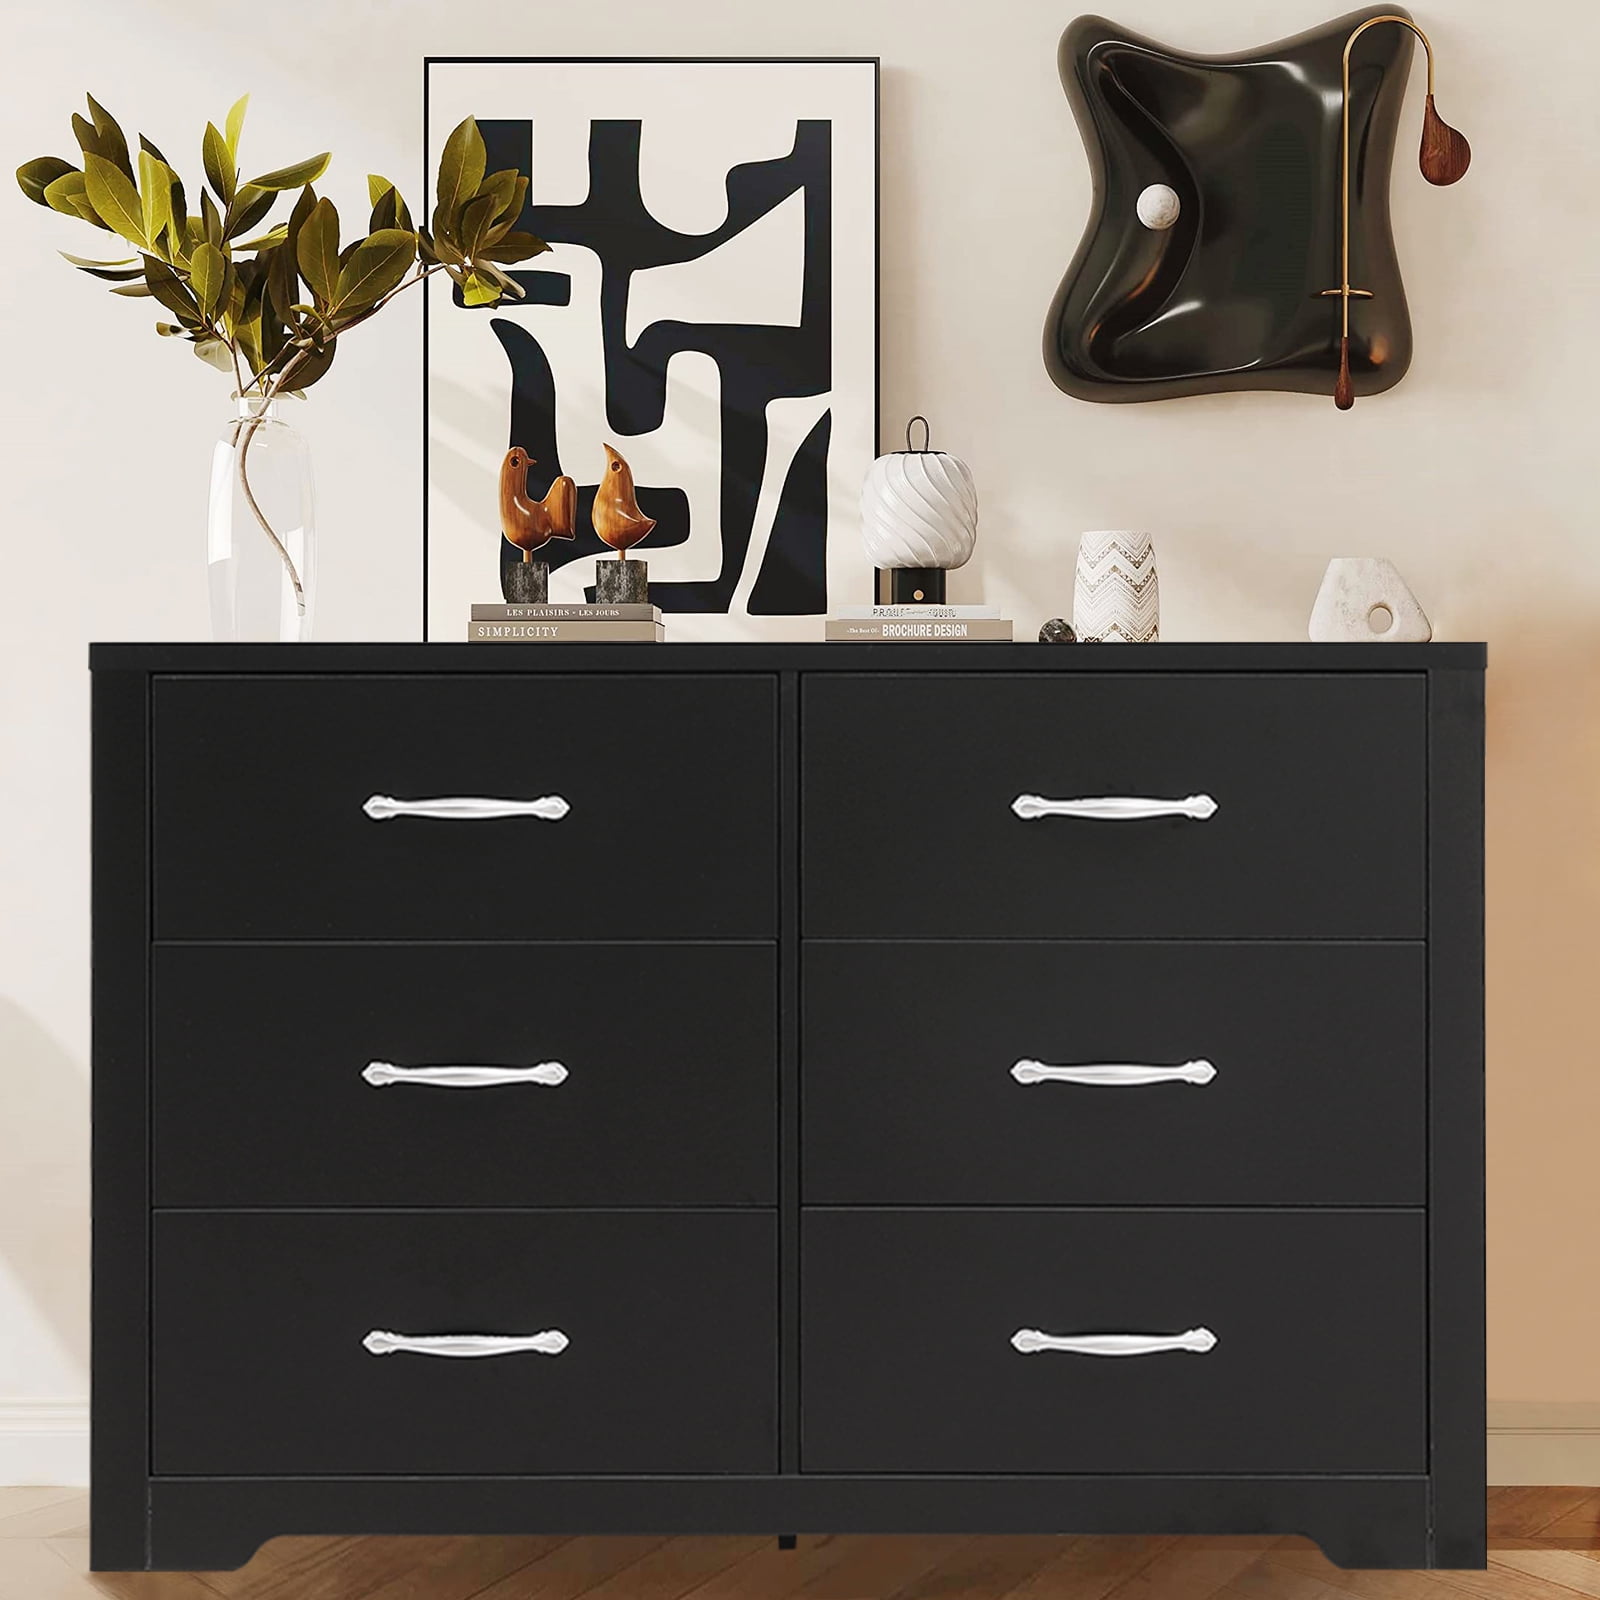 SUGIFT Black Double Dressers, Chest of 6 Drawers, Dresser for Bedroom ...